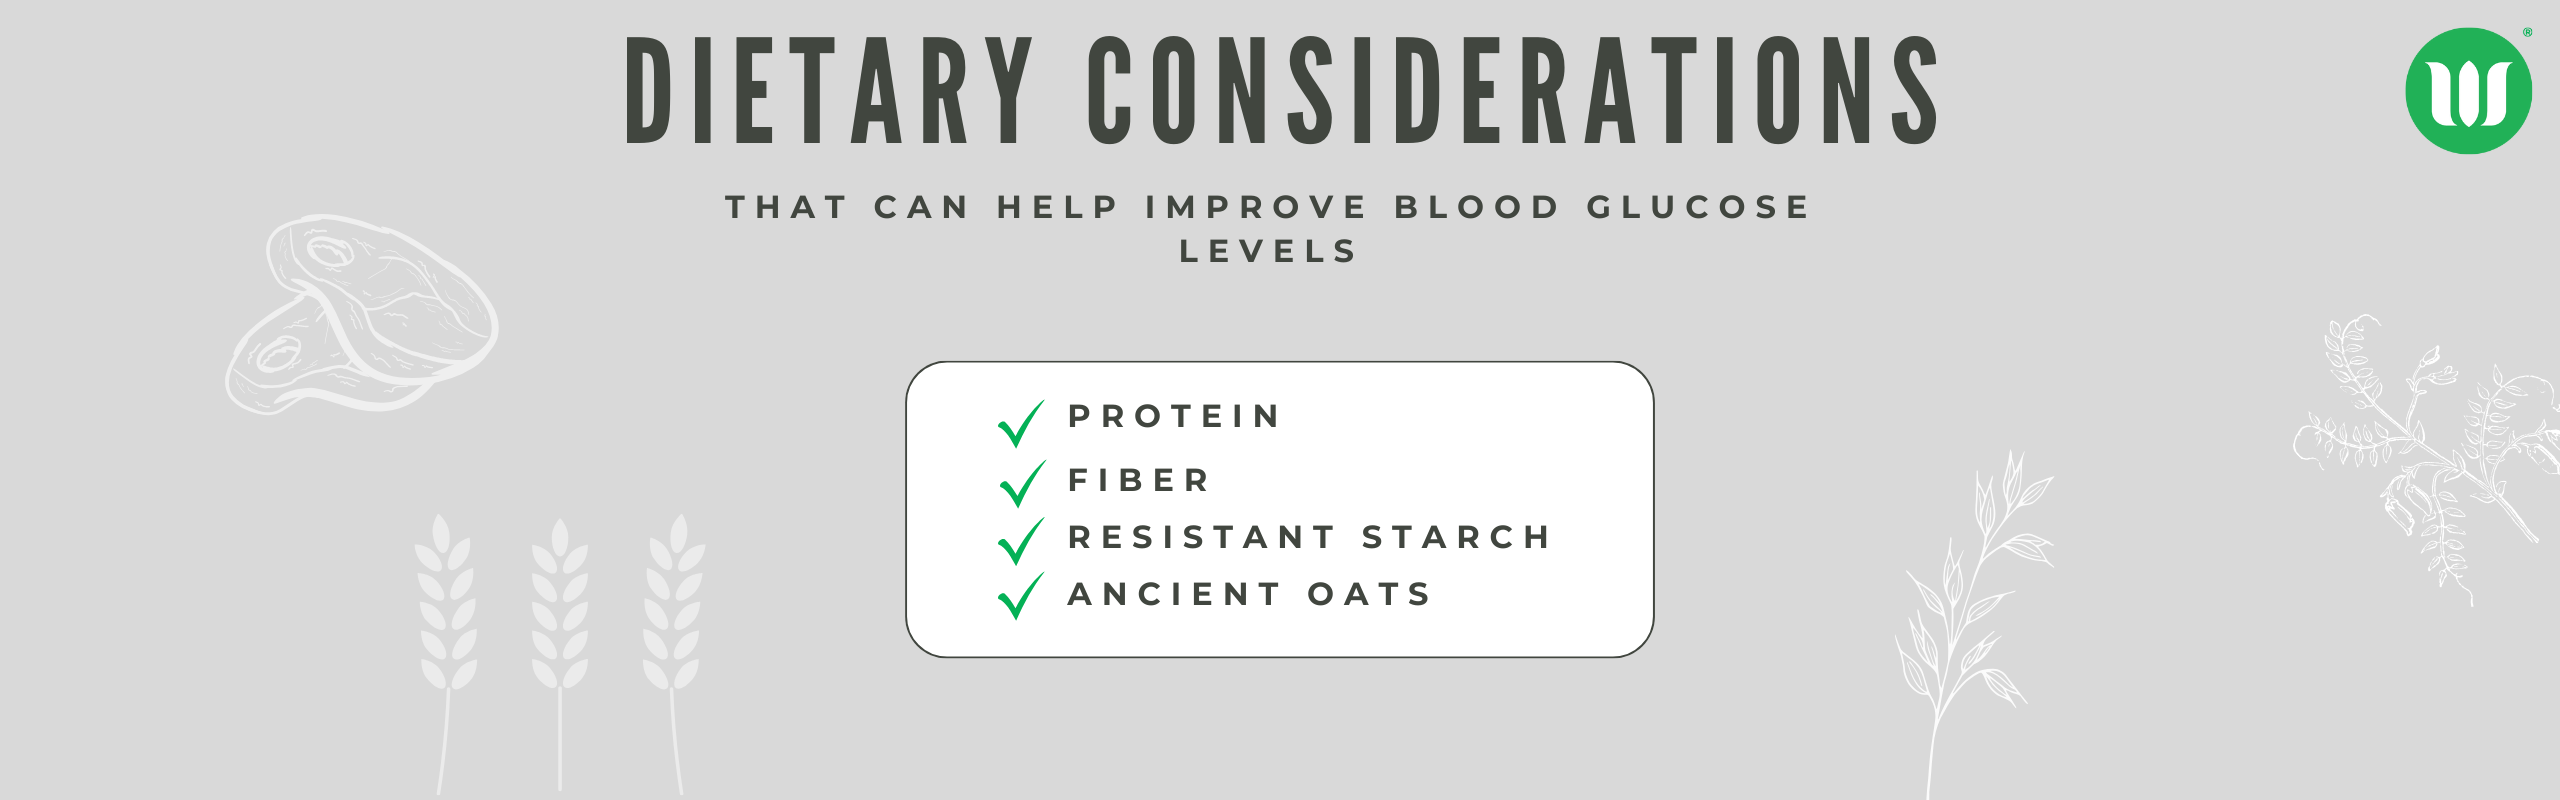 Dietary considerations that impact blood sugar levels